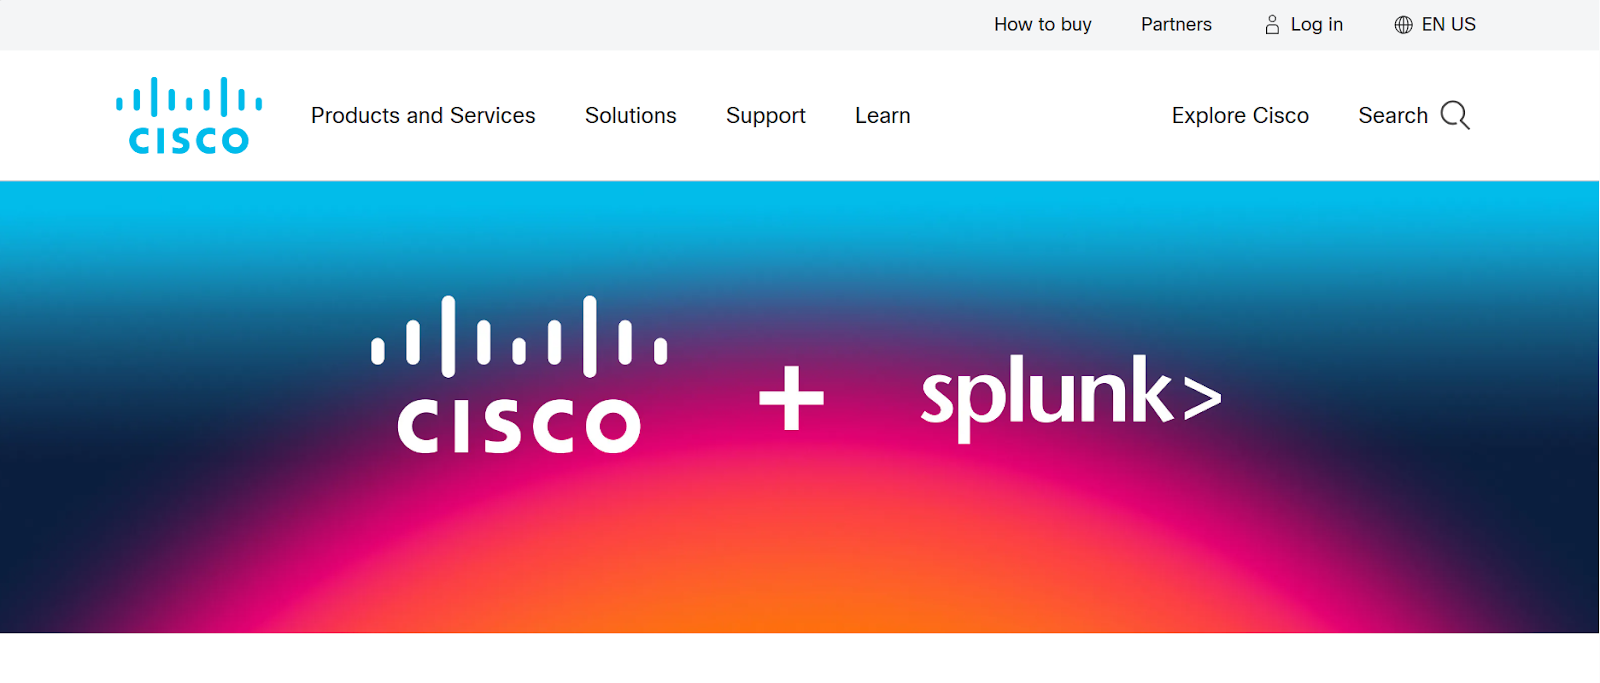 Cisco website snapshot highlighting the services it provides.